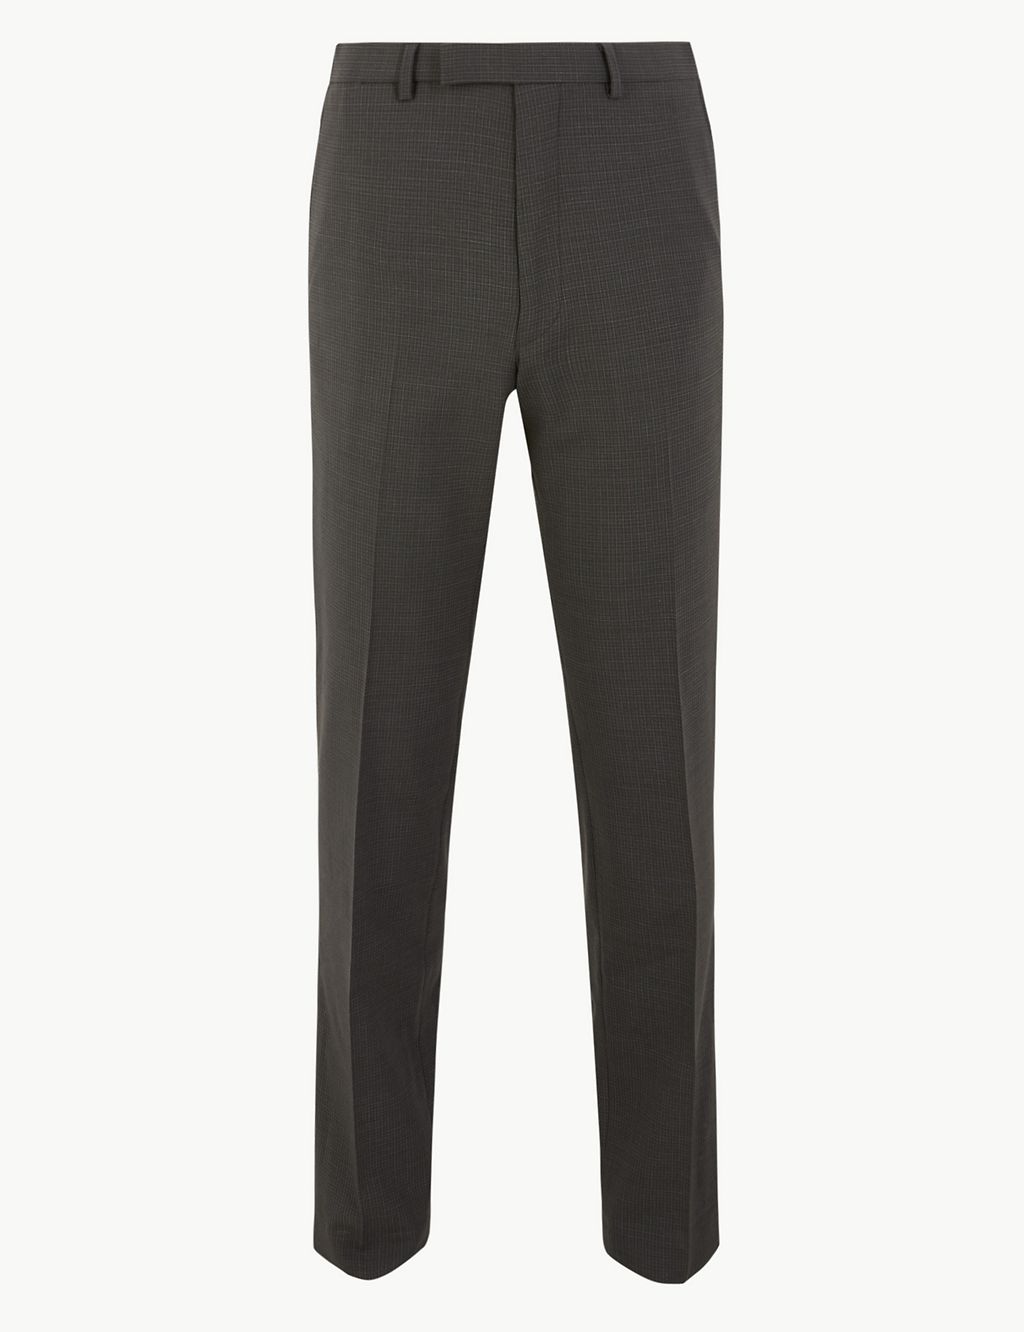 Grey Checked Tailored Fit Trousers 1 of 6